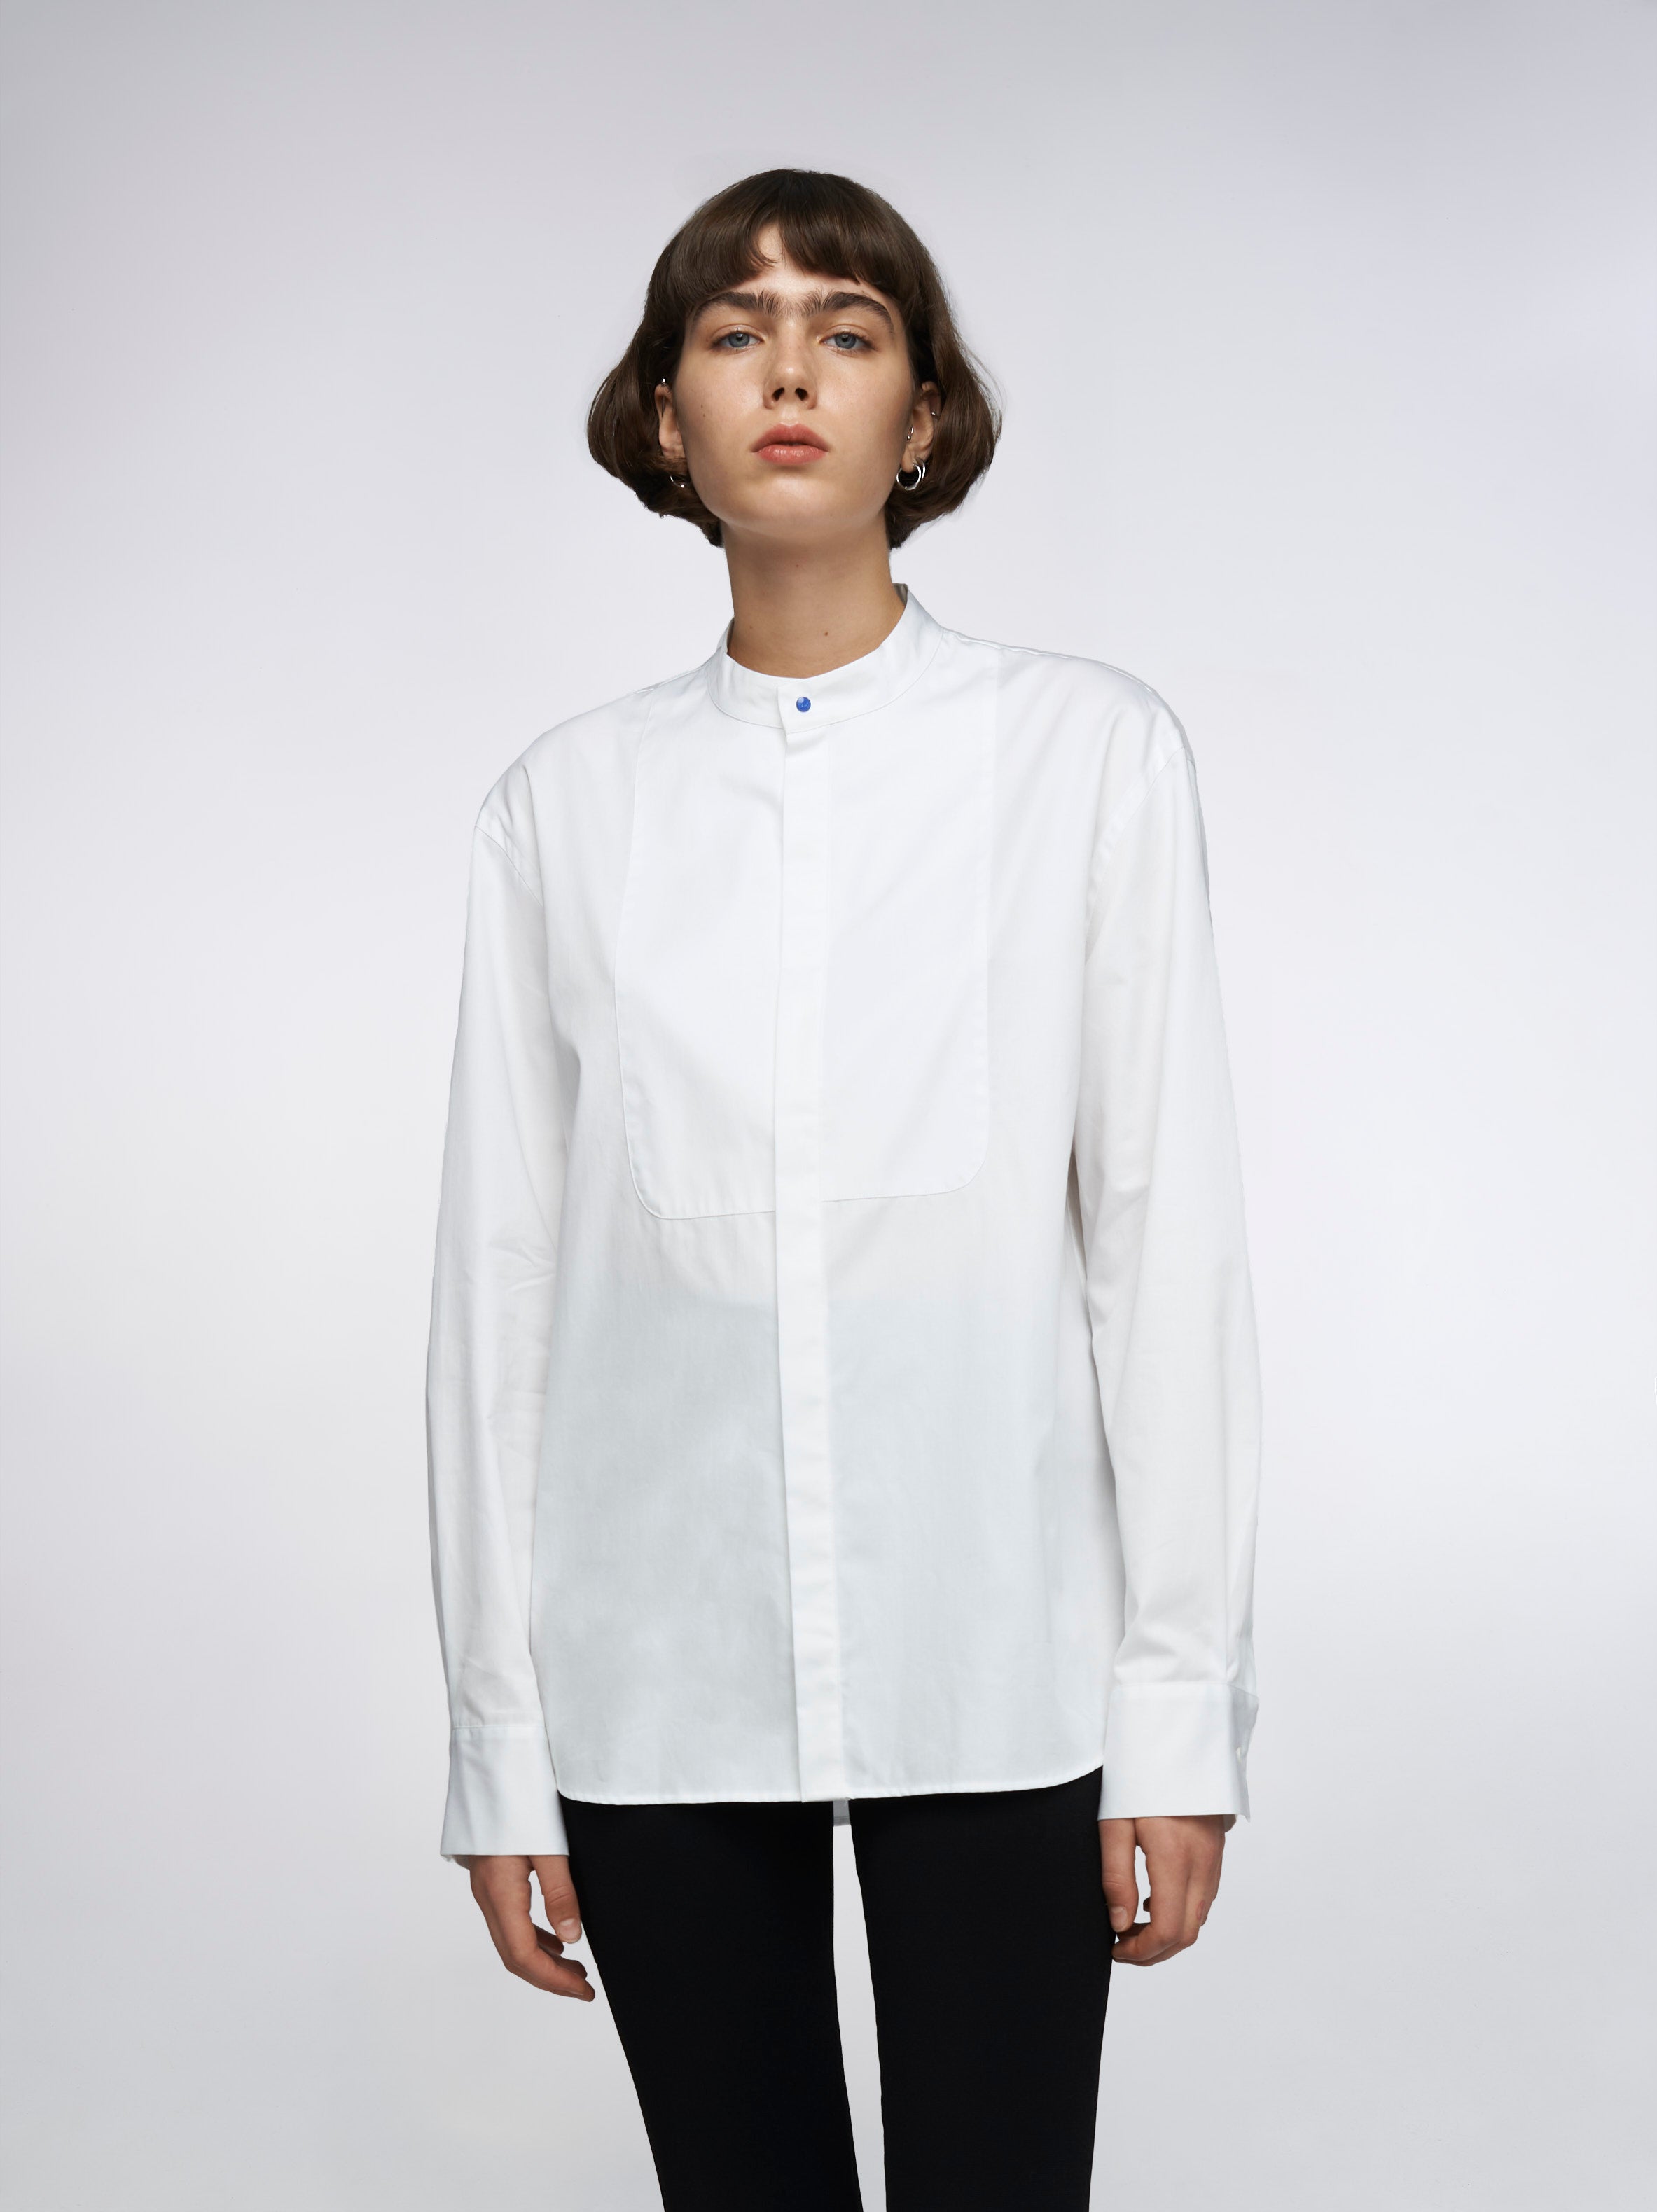 Relaxed Fit Unisex Shirt 05.1